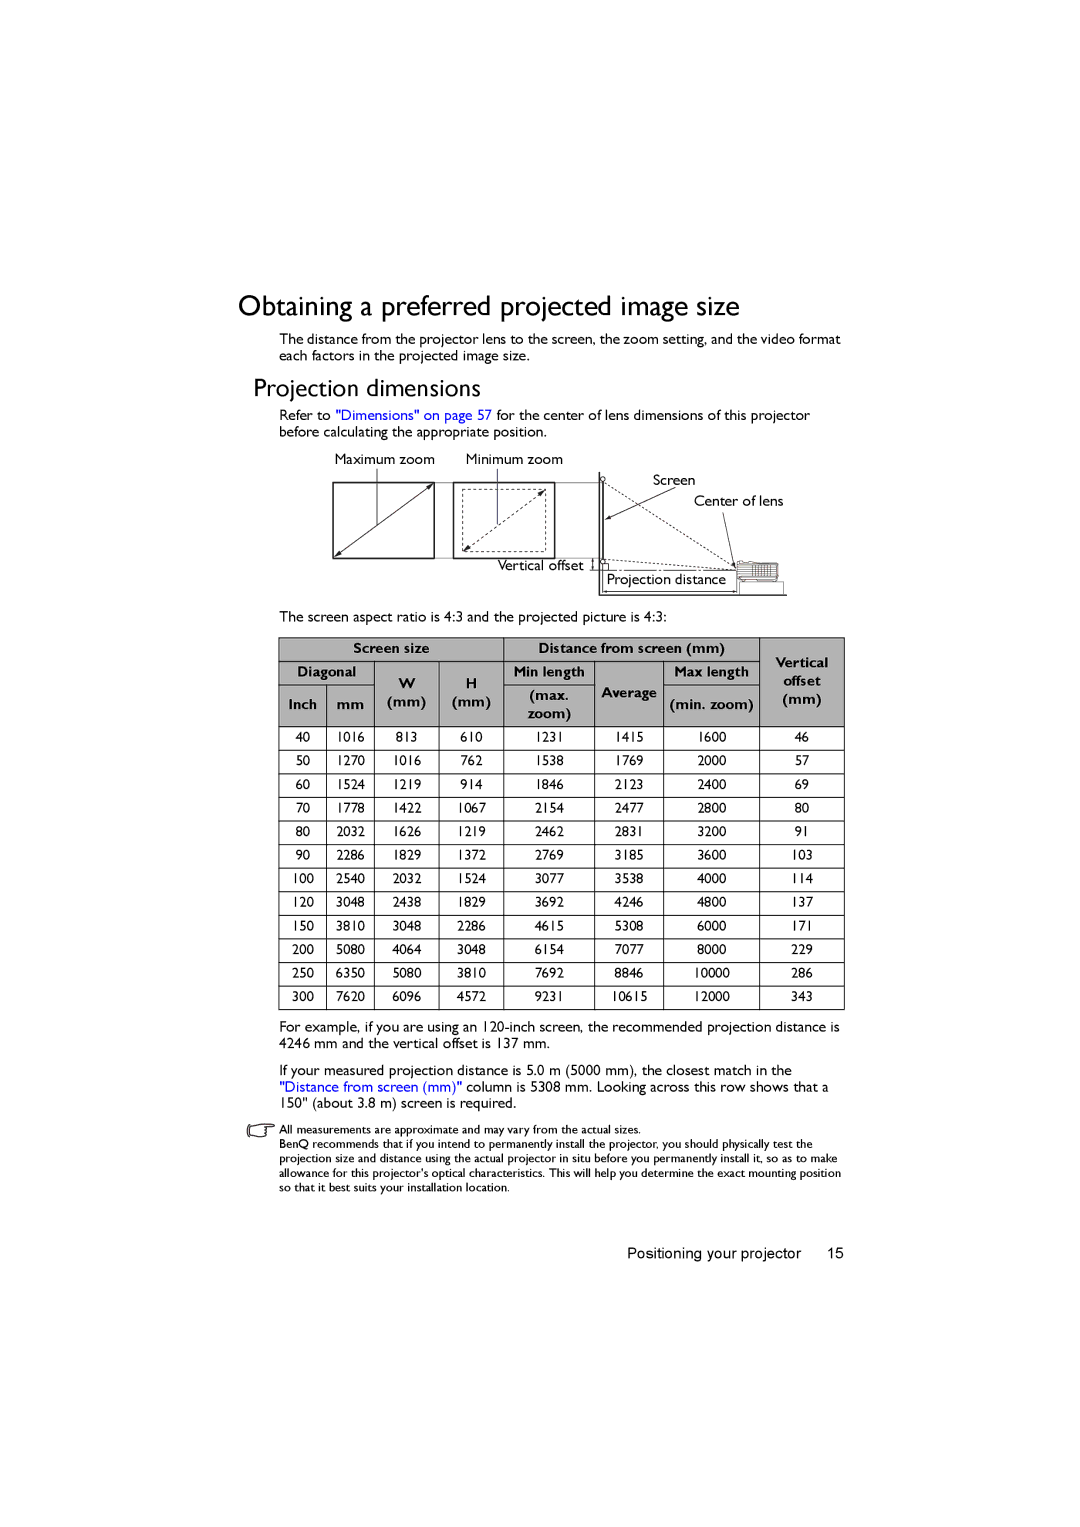 BenQ MX722 user manual Obtaining a preferred projected image size, Projection dimensions, Offset, Inch Max Average 